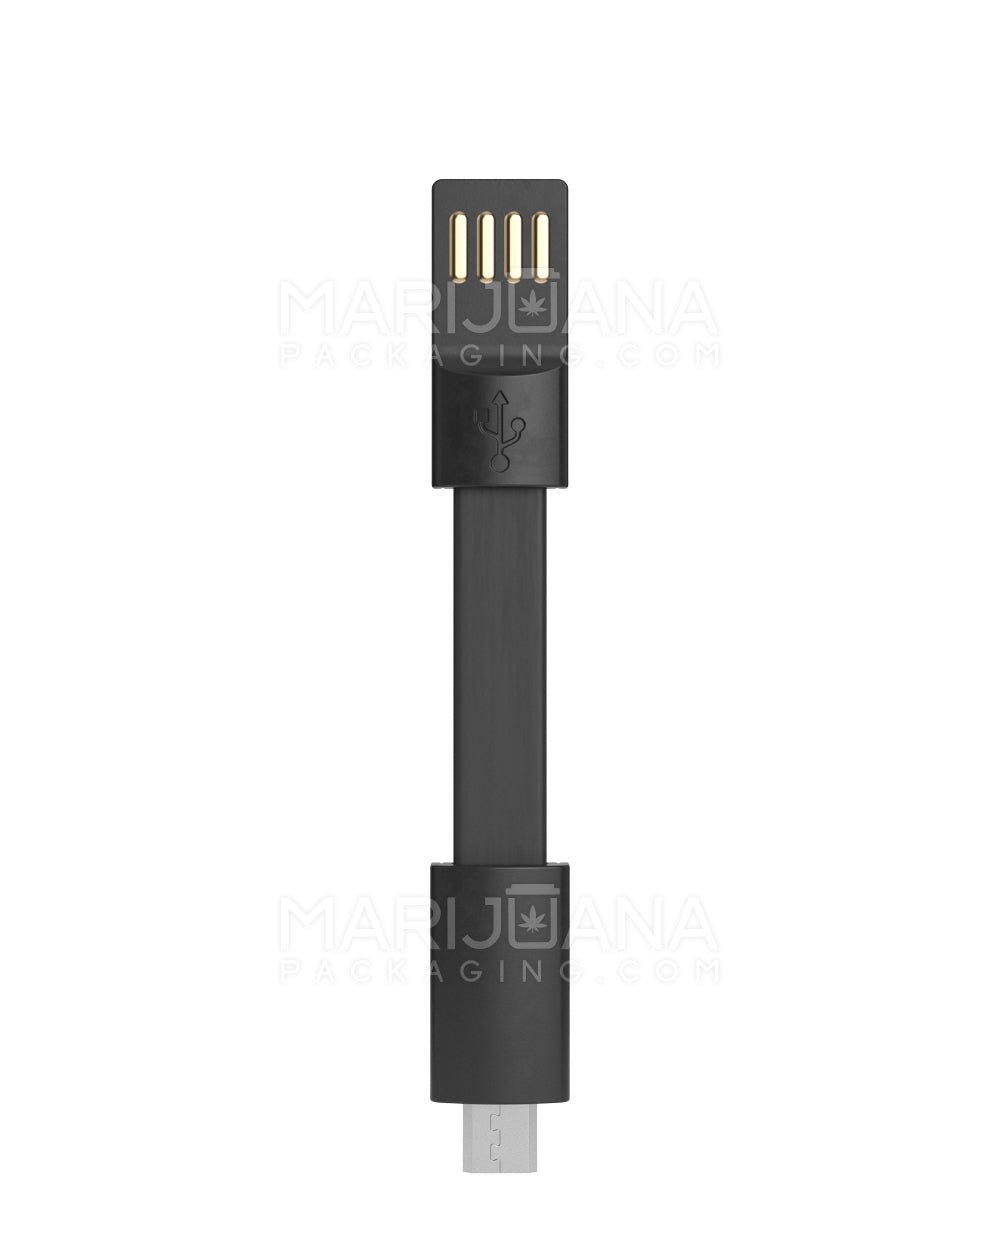 Vaporizer 3.5" USB to Micro USB Connection Cable | Black - 100 Count - 1